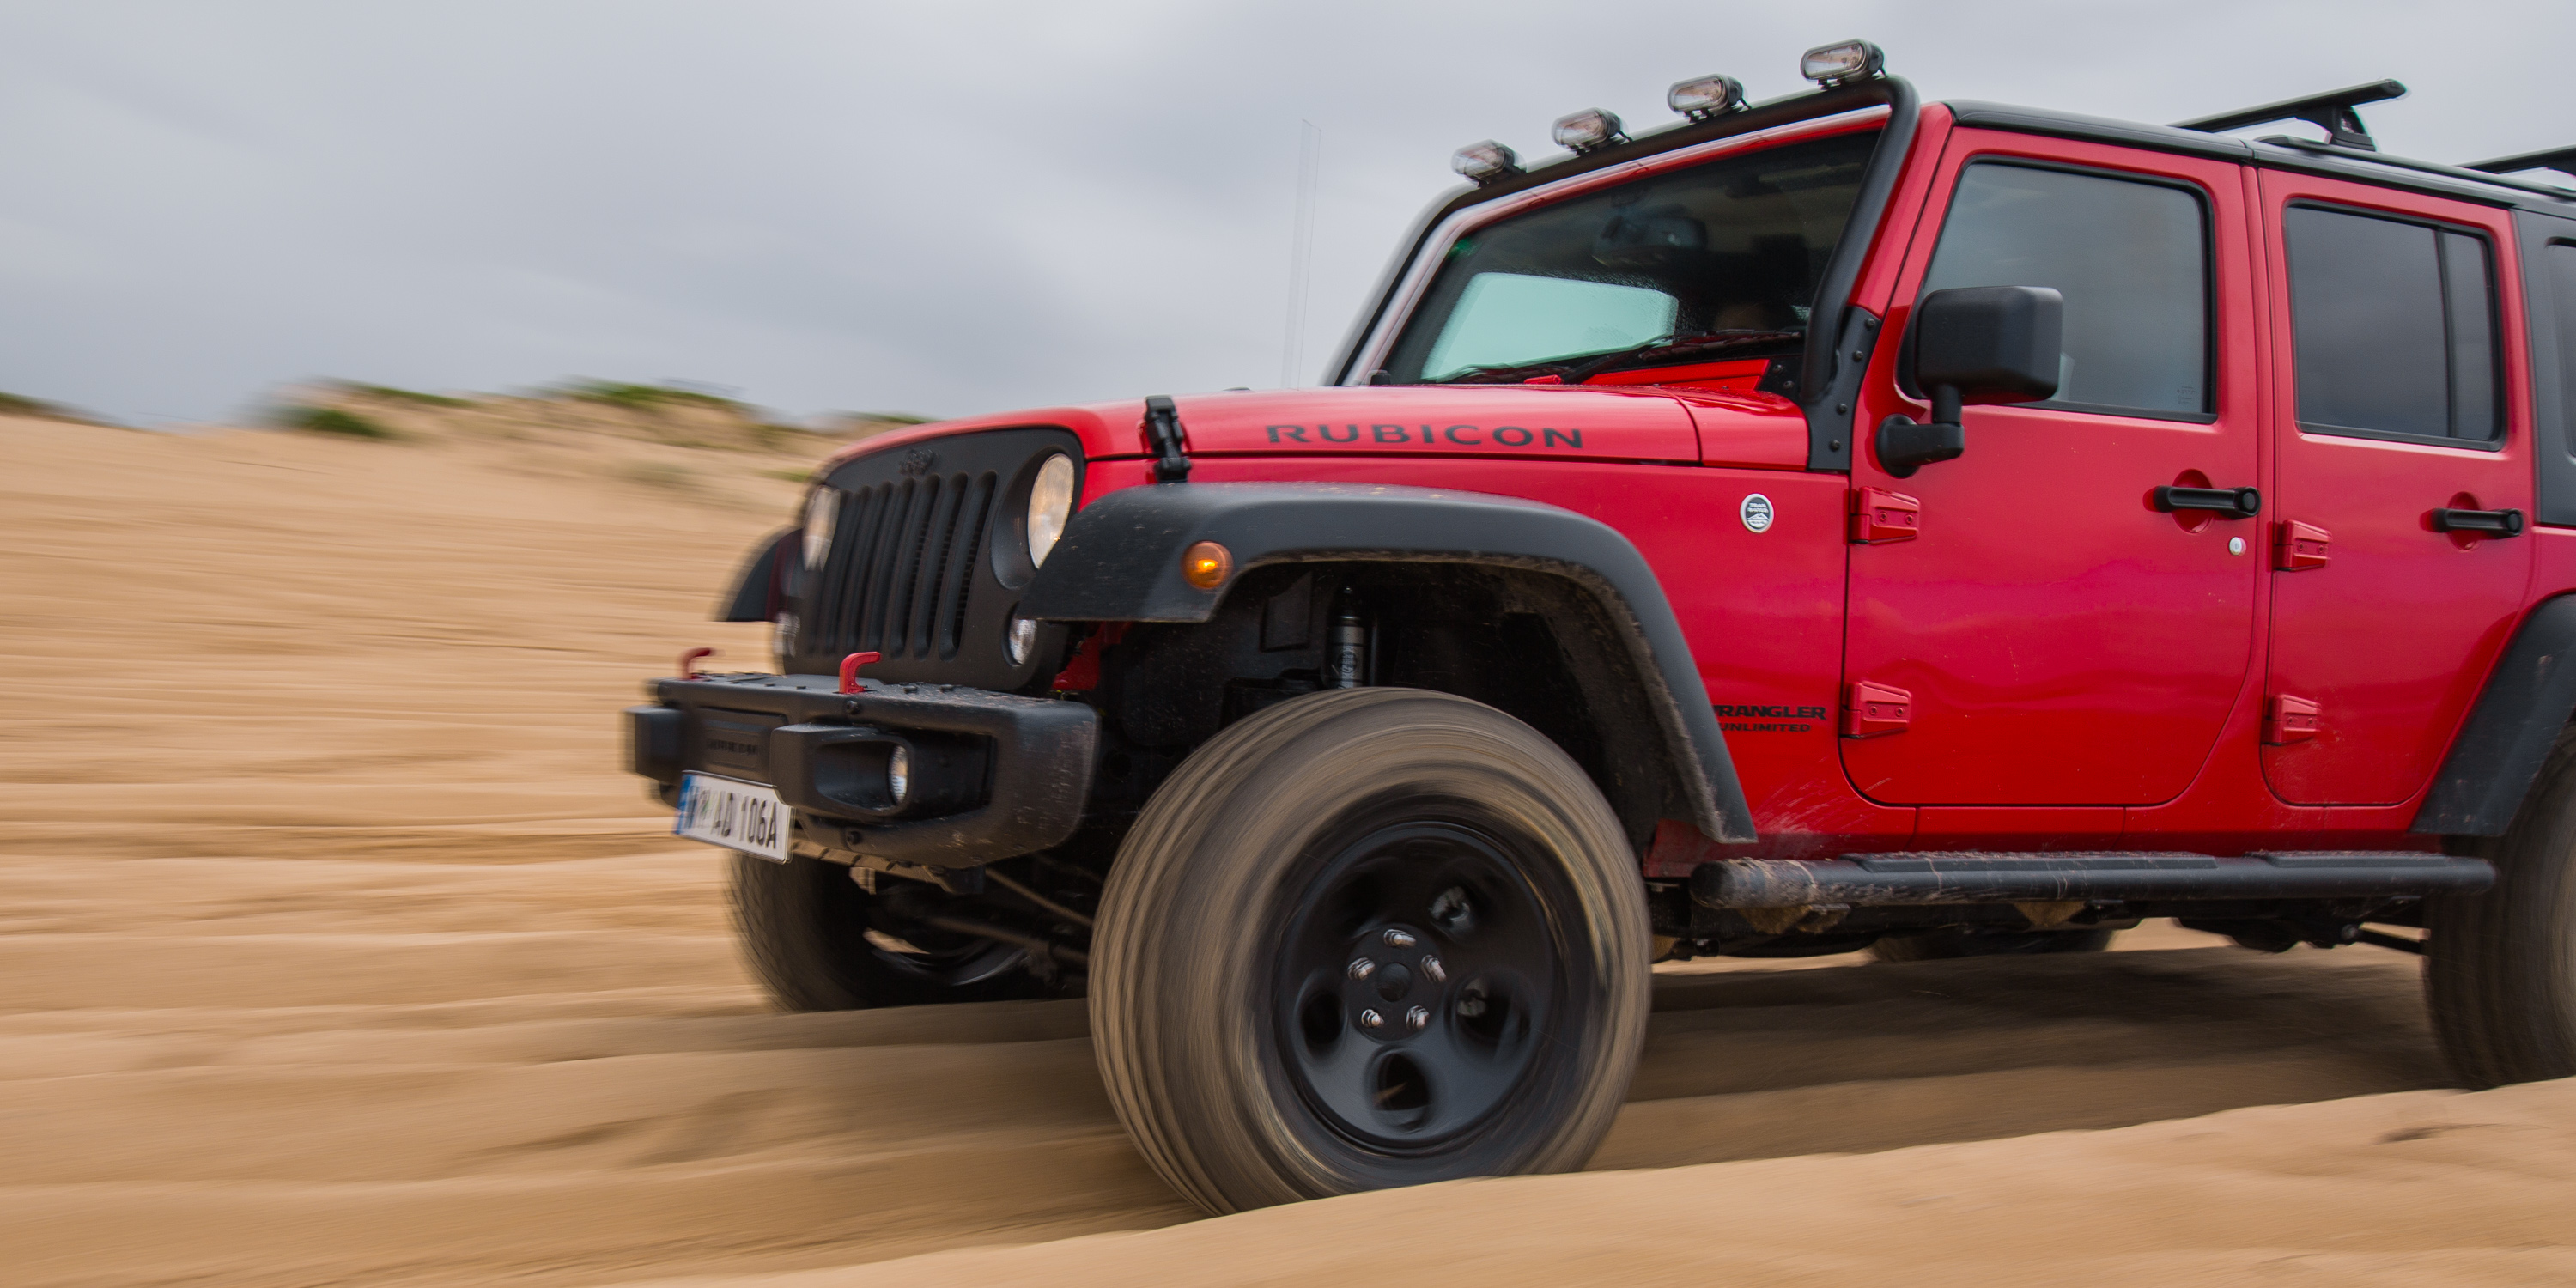 Hitting the beach in the 2017 Jeep Wrangler Unlimited